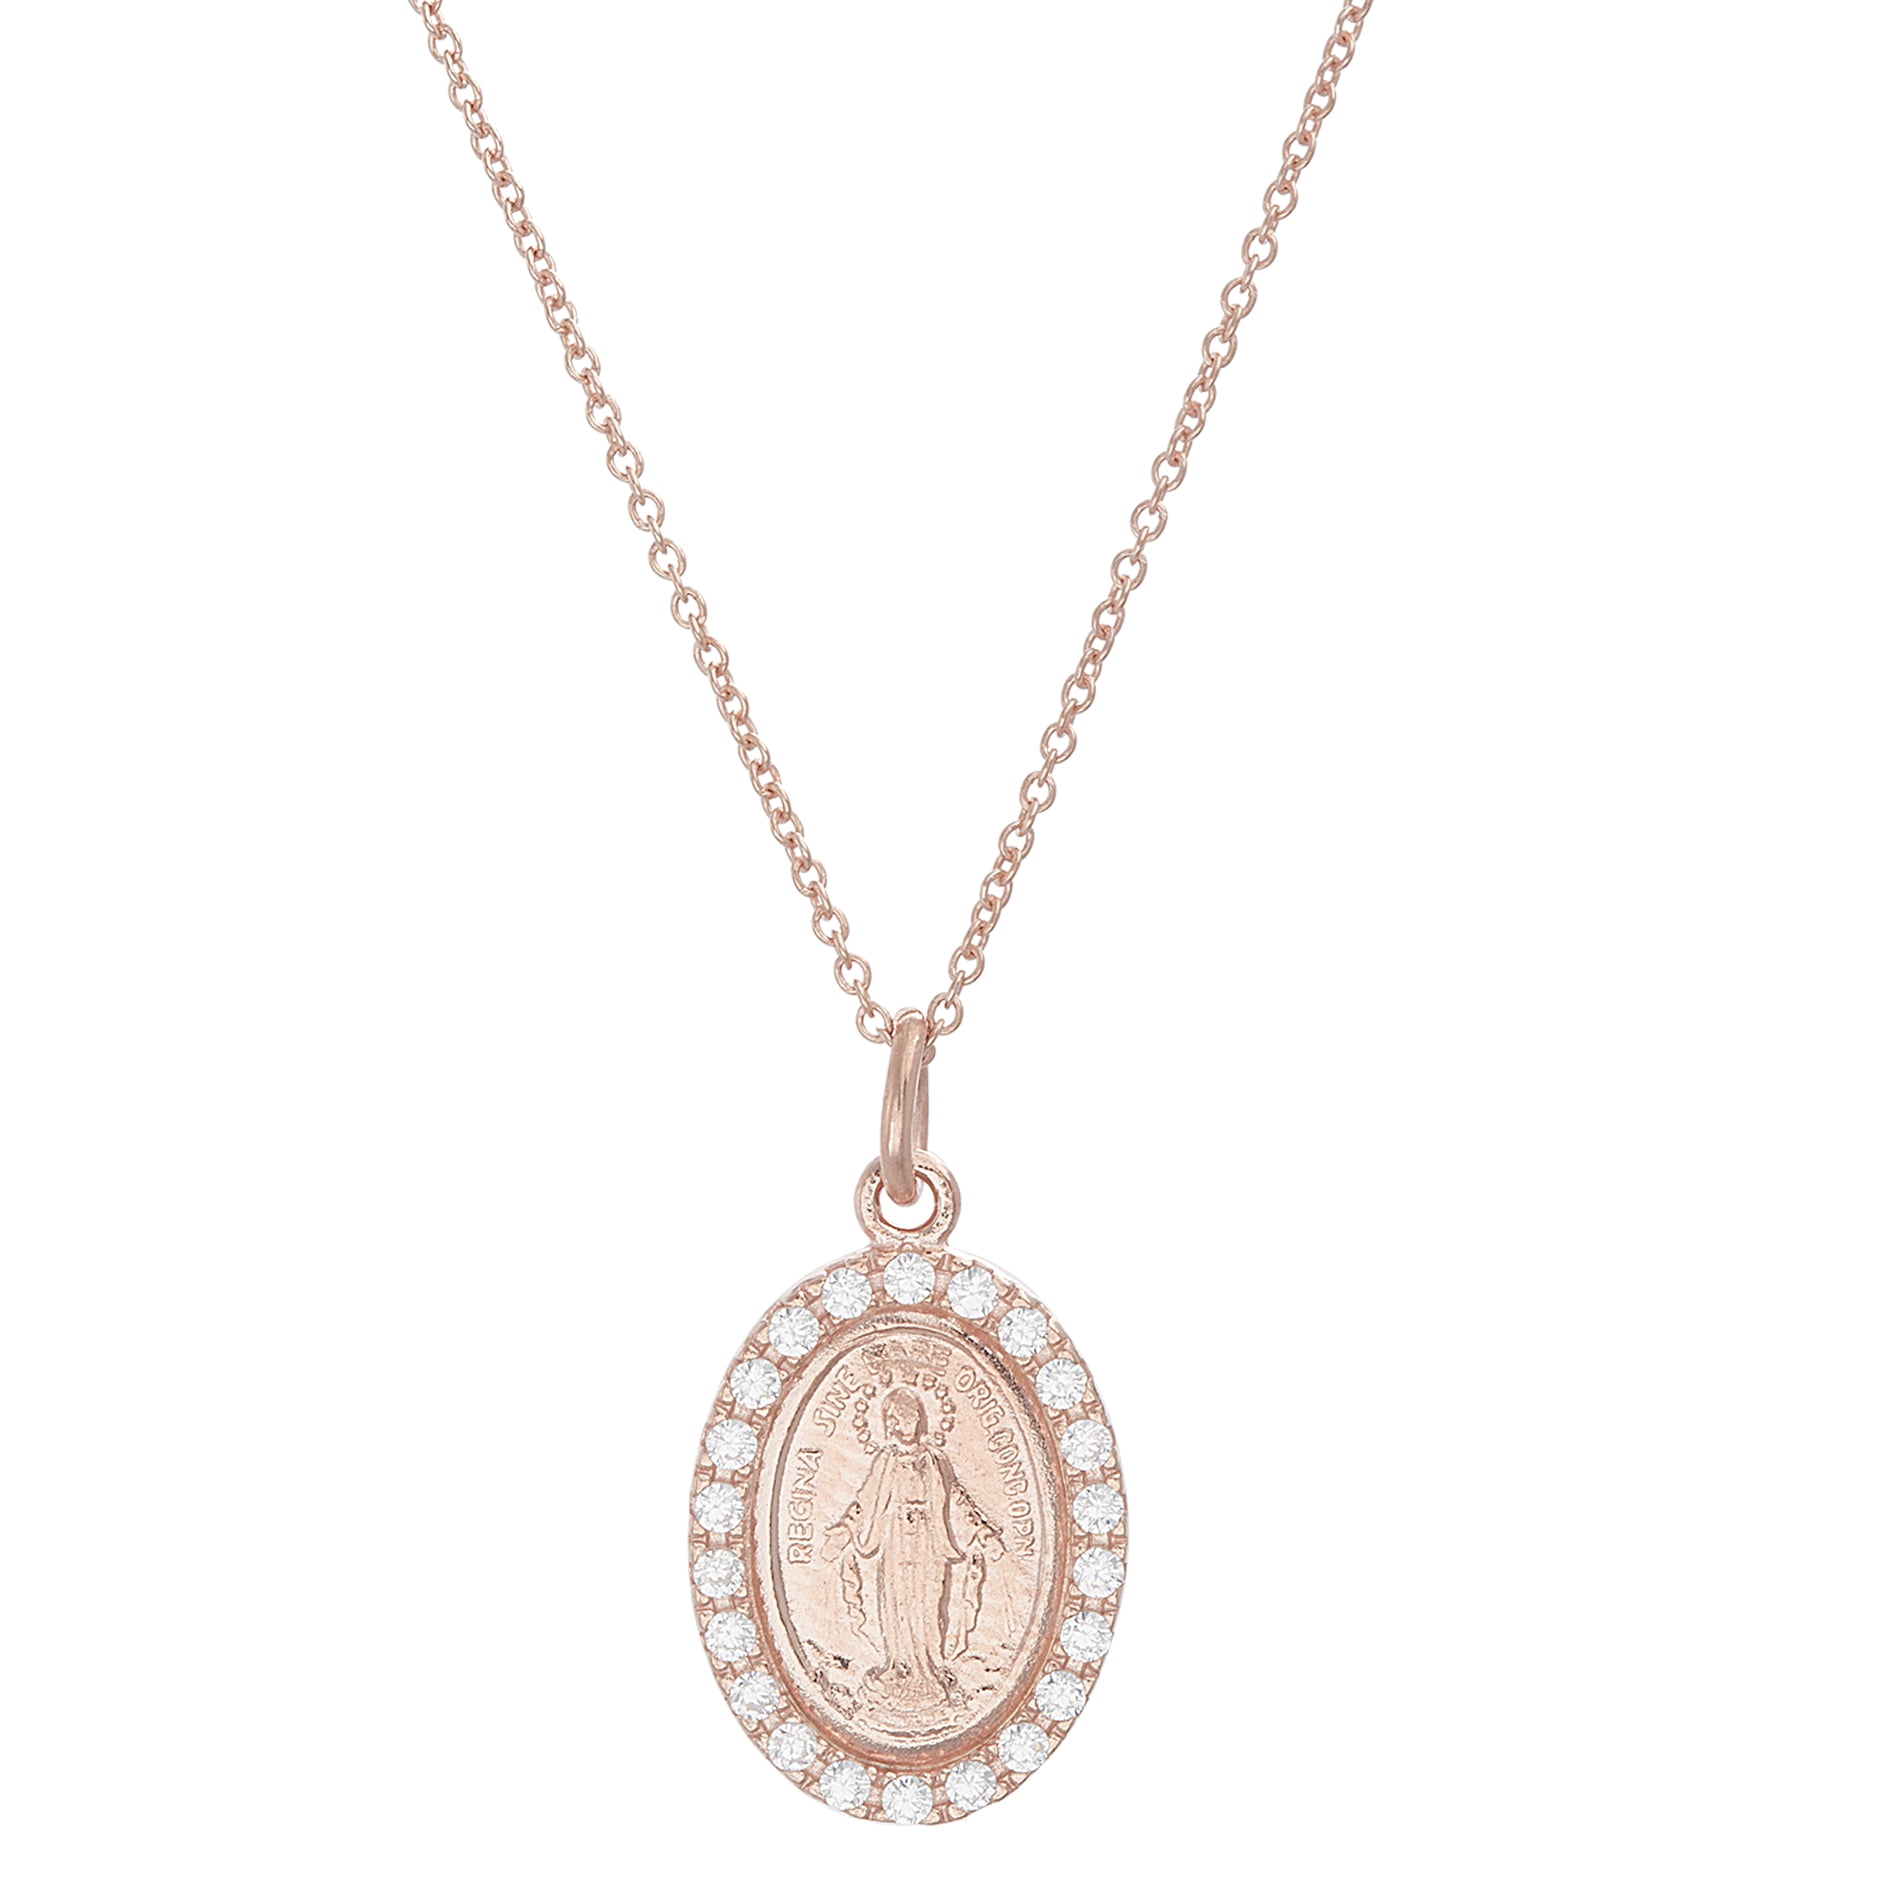 religious ICON pendant OVAL necklace GLASS  charms 16"18" silver plated chain